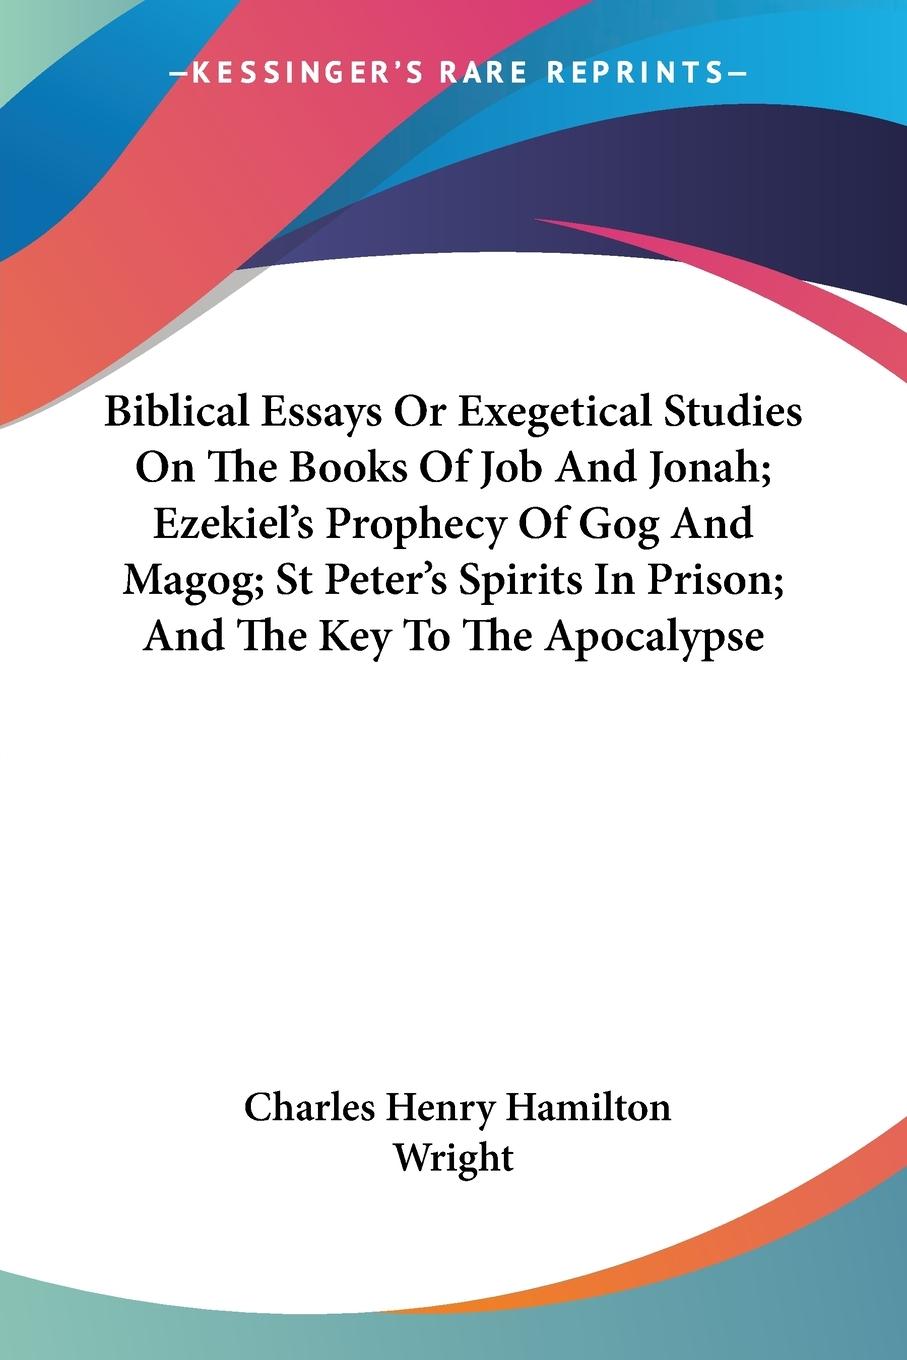 Biblical Essays Or Exegetical Studies On The Books Of Job And Jonah; Ezekiel s Prophecy Of Gog And Magog; St Peter s Spirits In Prison; And The Key To The Apocalypse - Wright, Charles Henry Hamilton